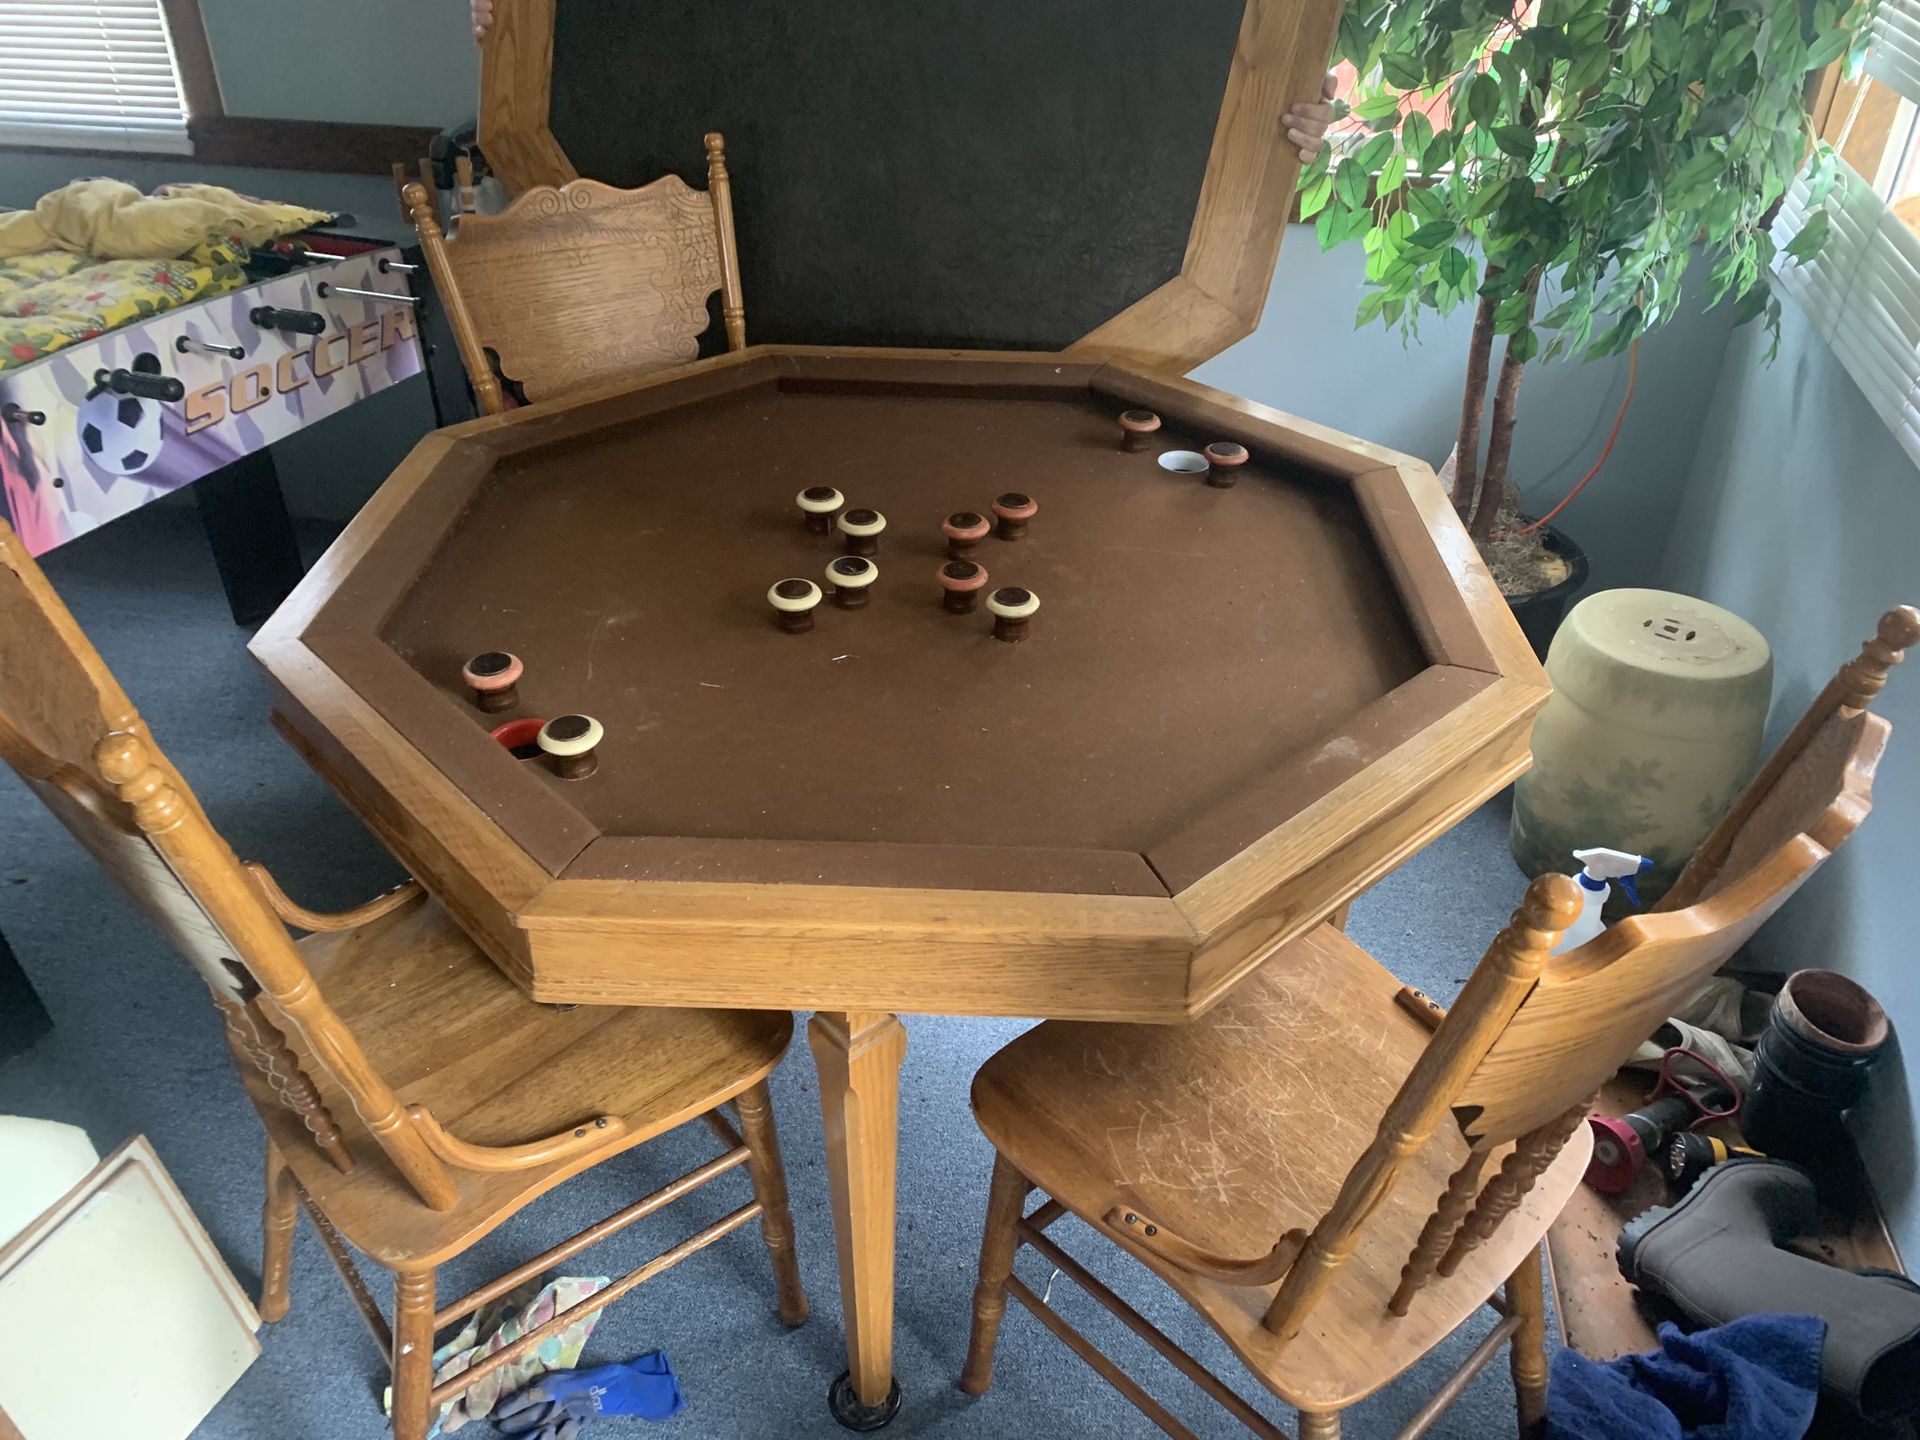 Bumper pool and poker table with chairs